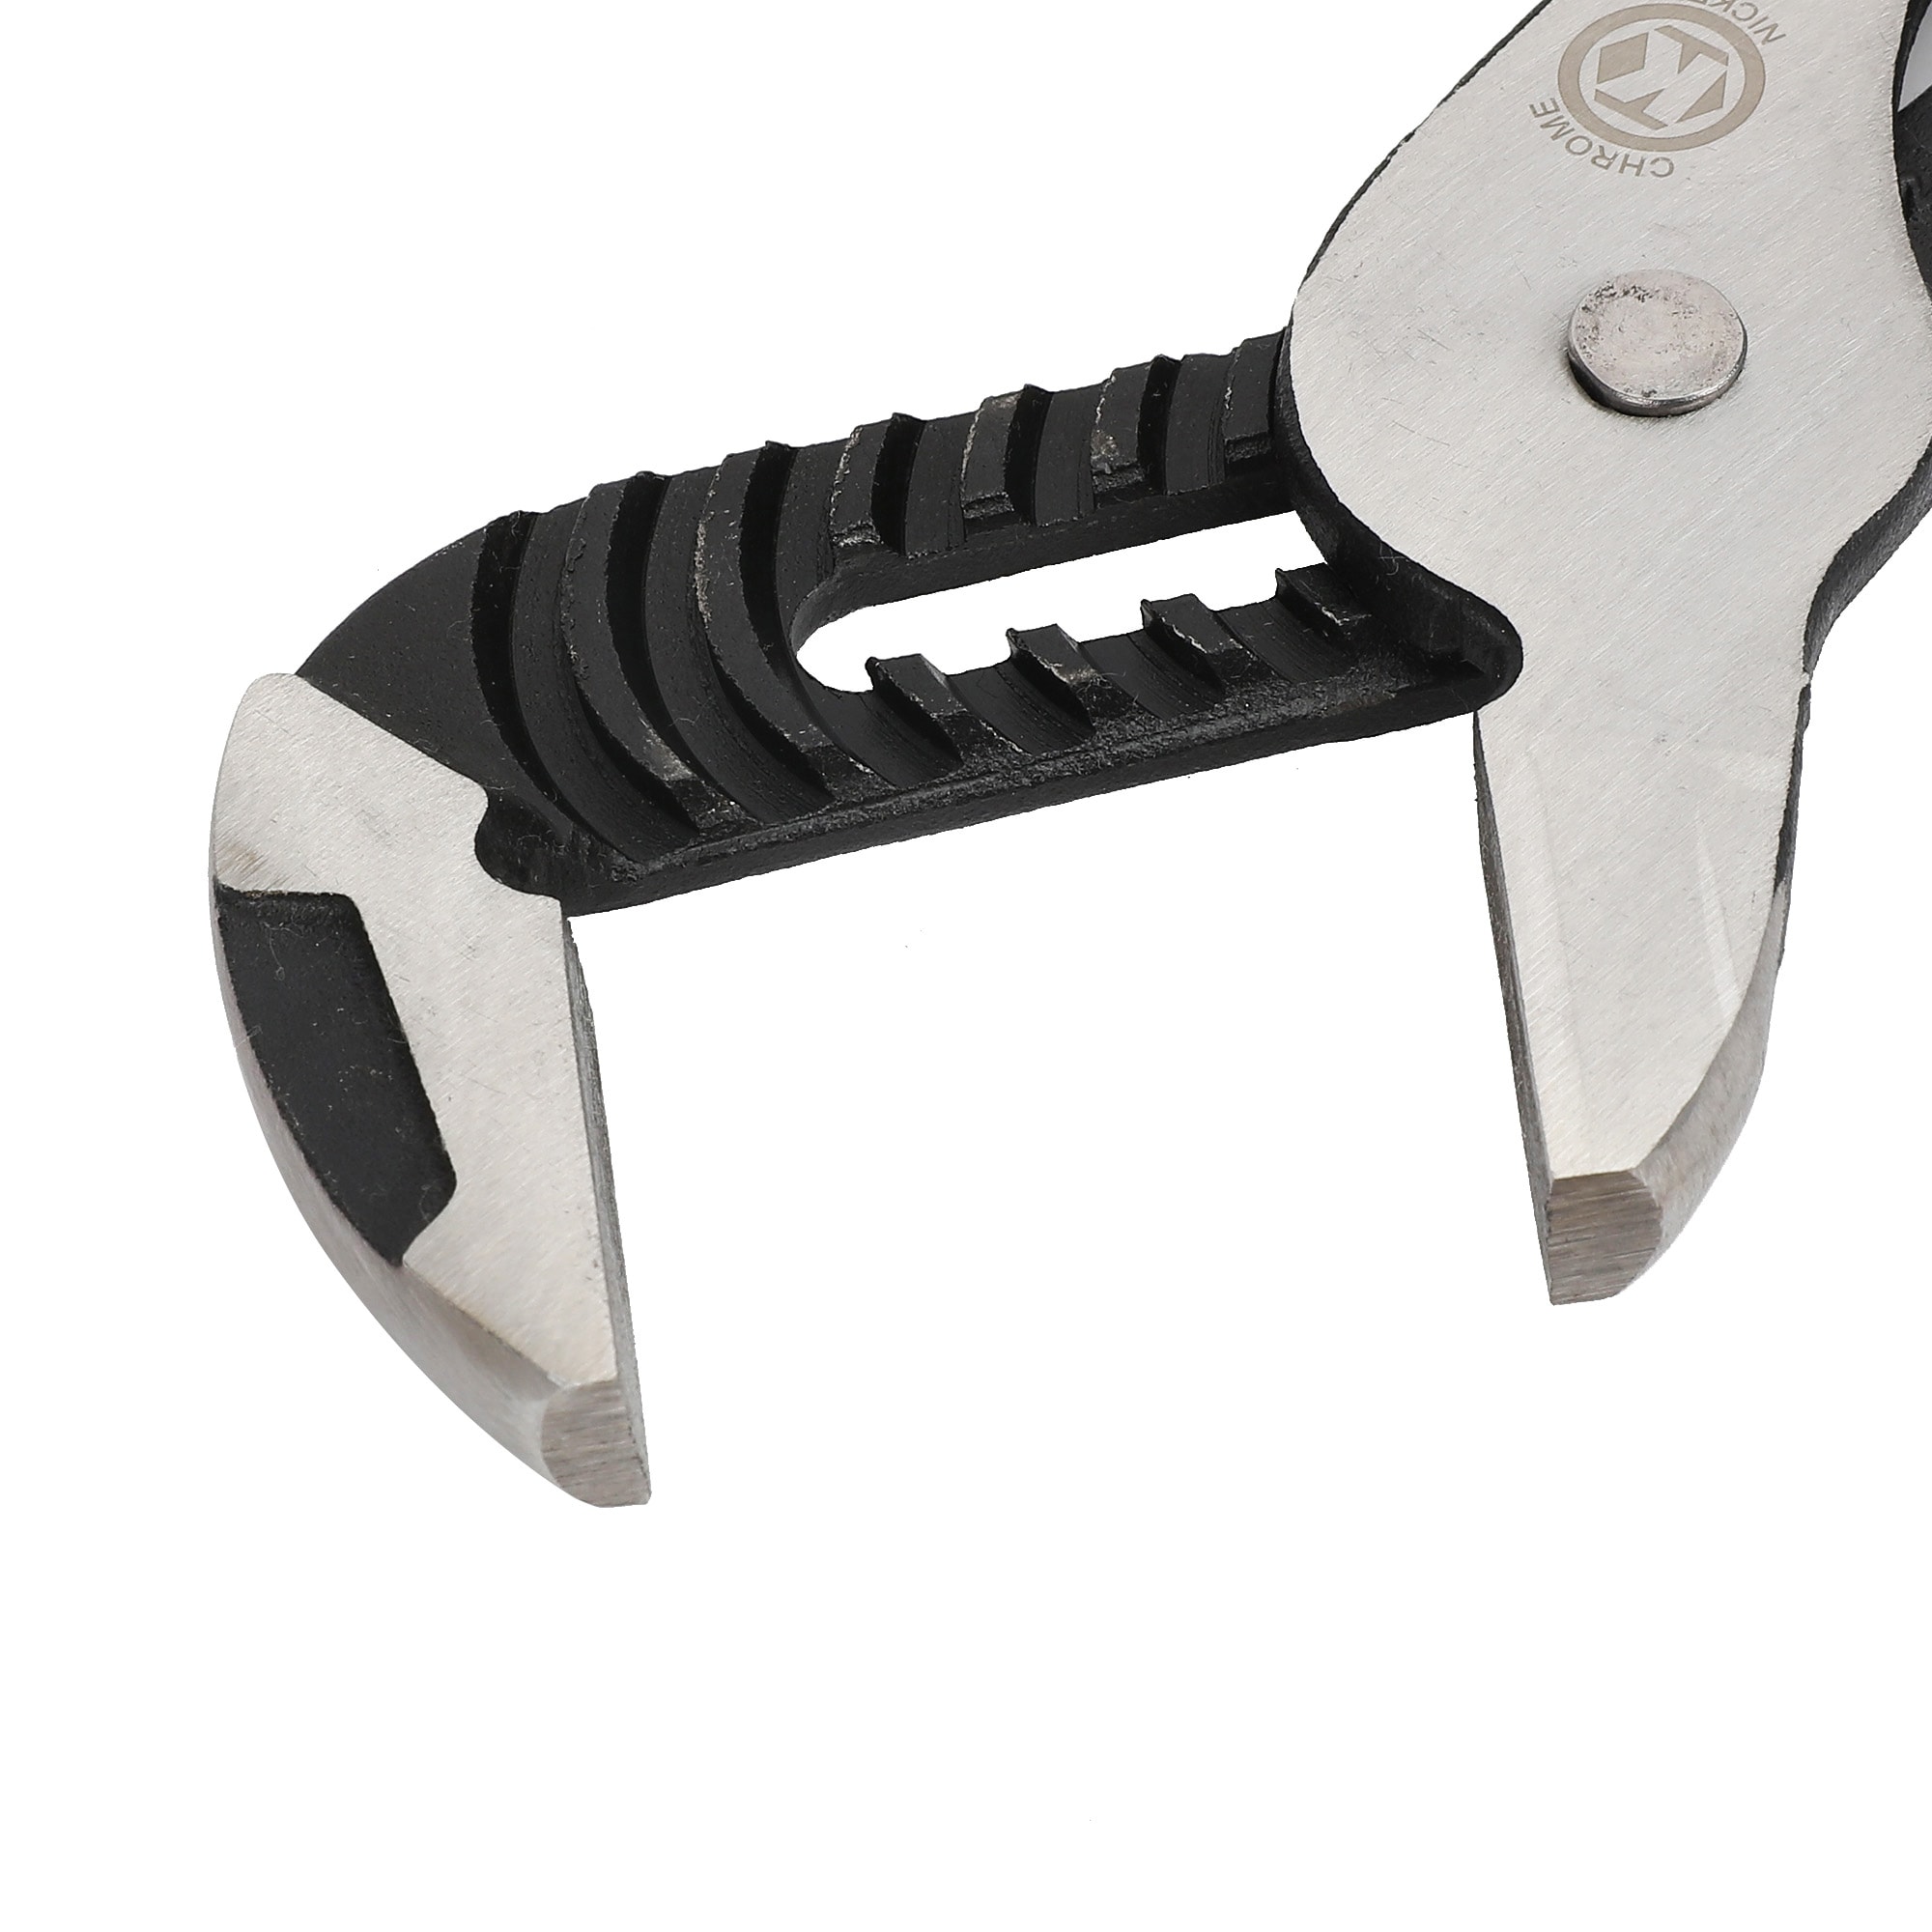 Kobalt Pliers in the Plumbing Wrenches & Specialty Tools department at